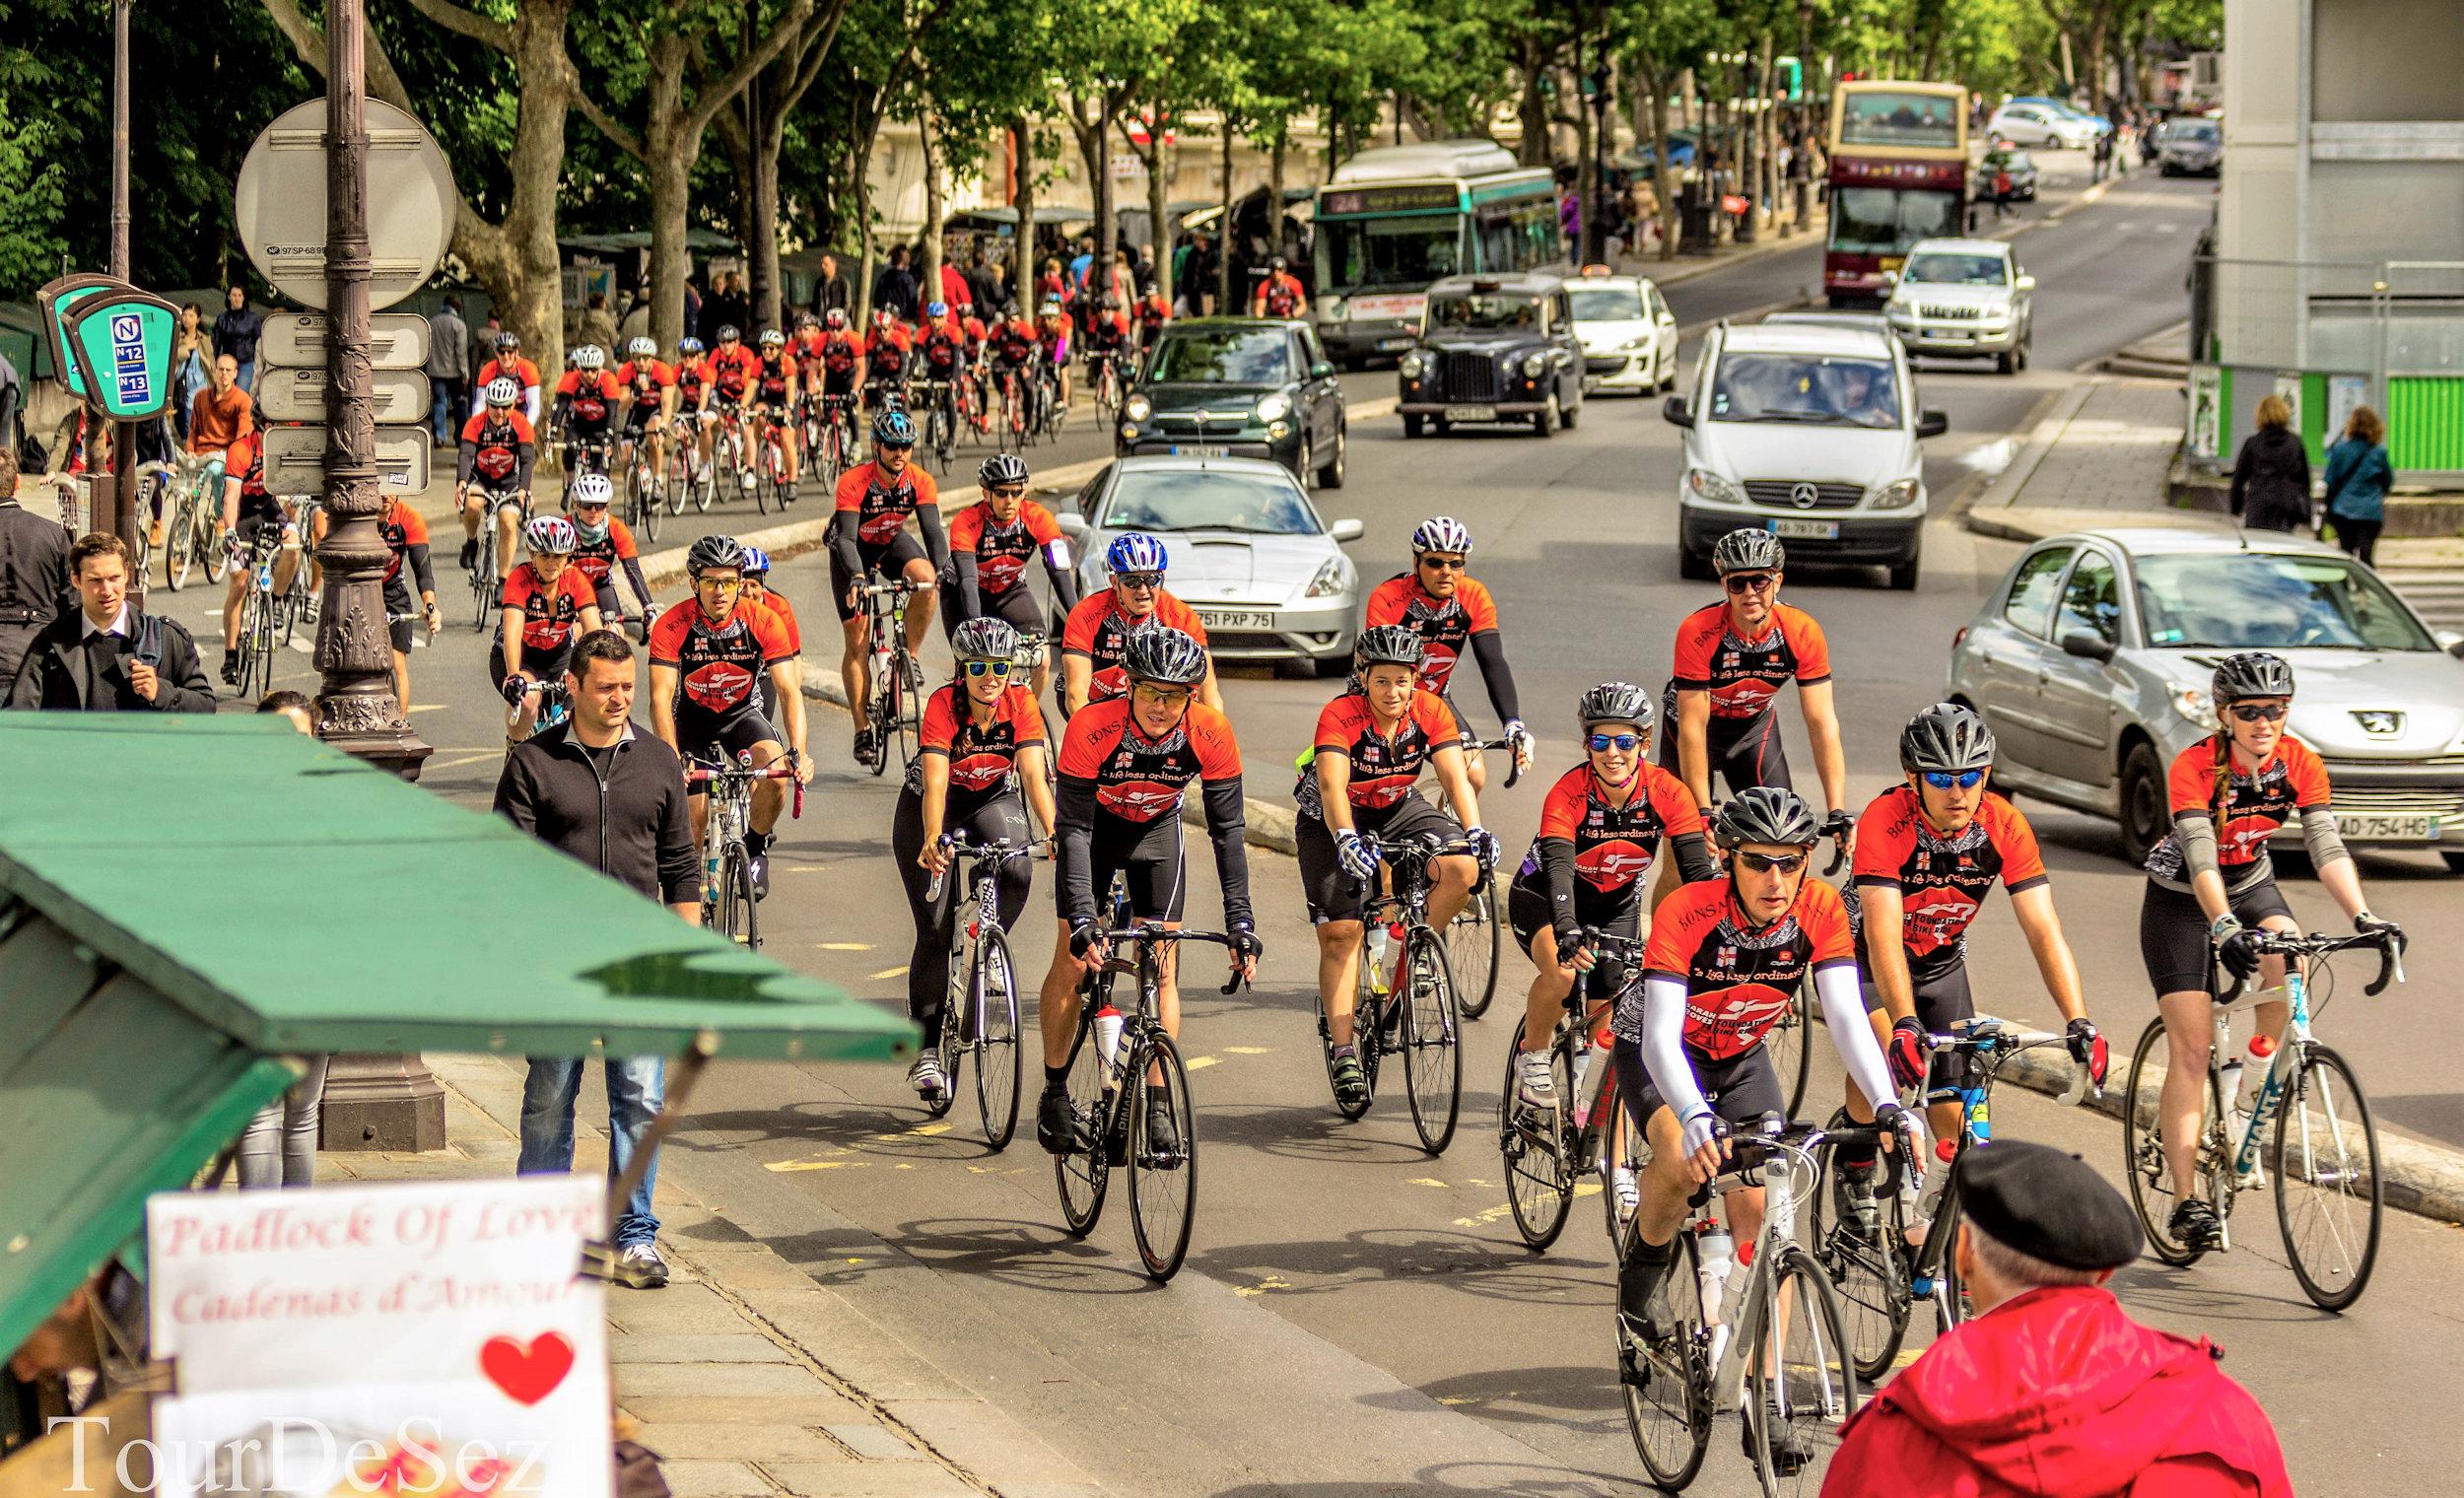 Fundraising cycle trip to Paris